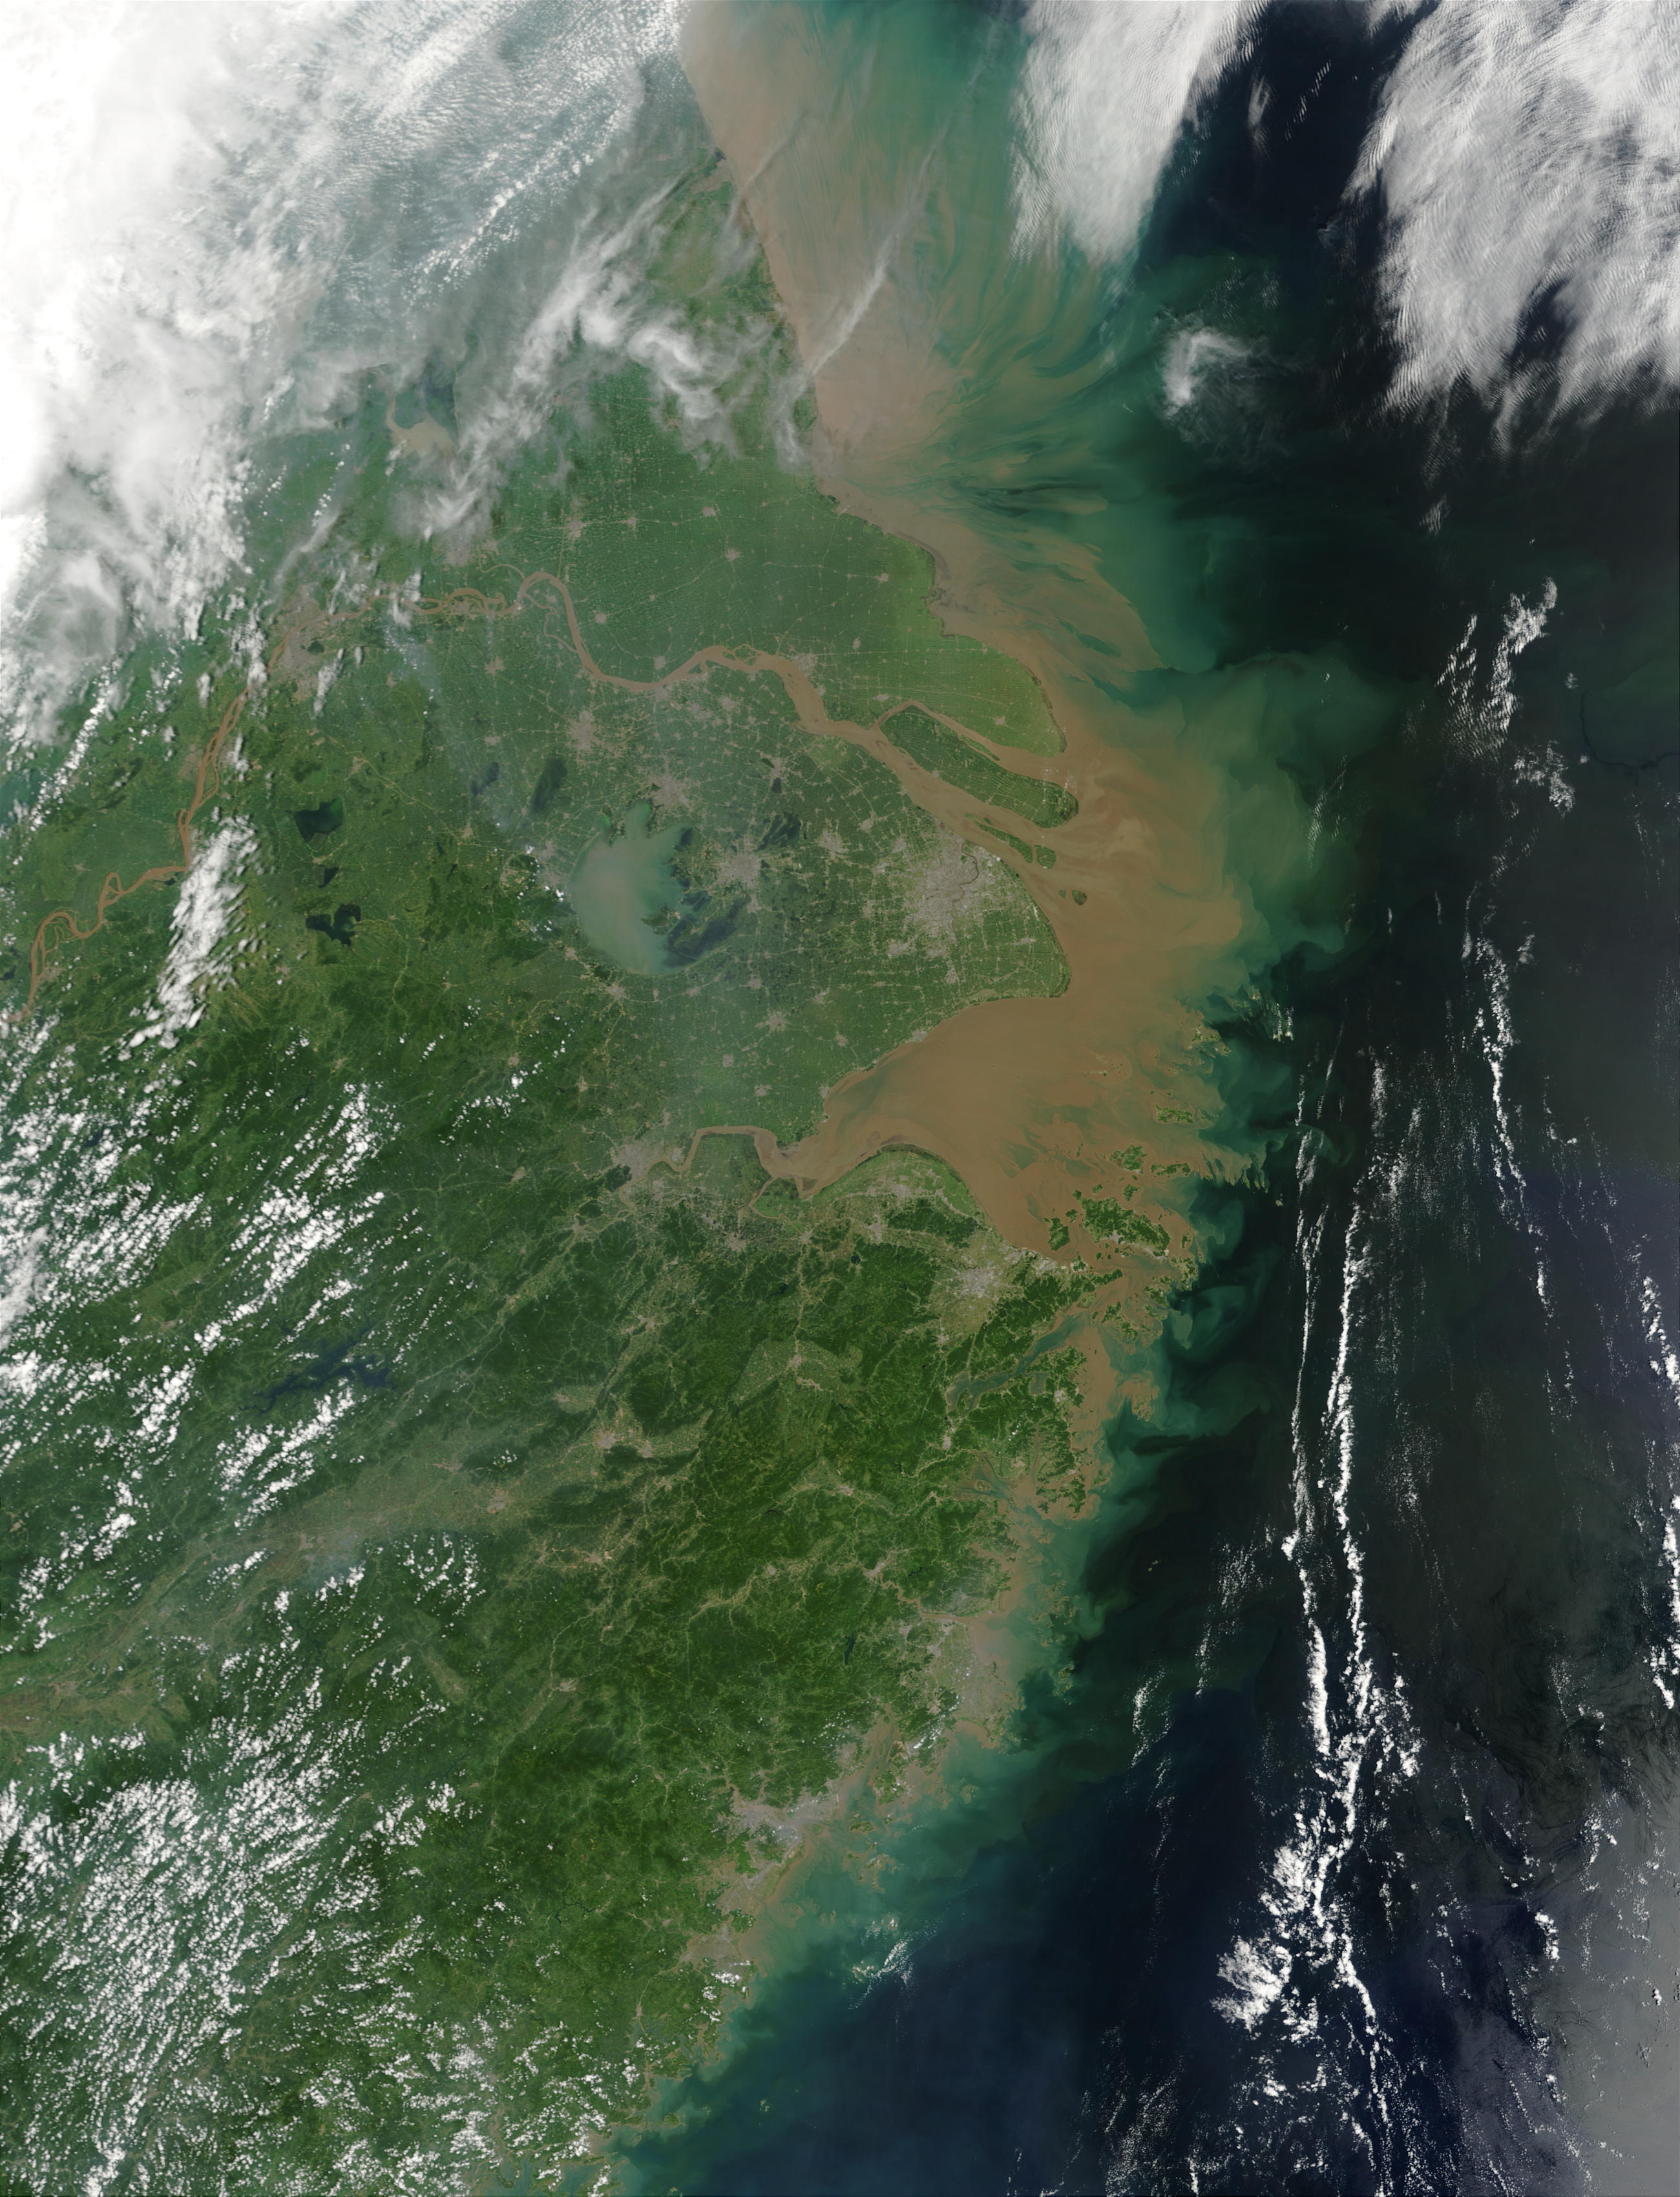 Mouth of the Yangtse River, China - related image preview